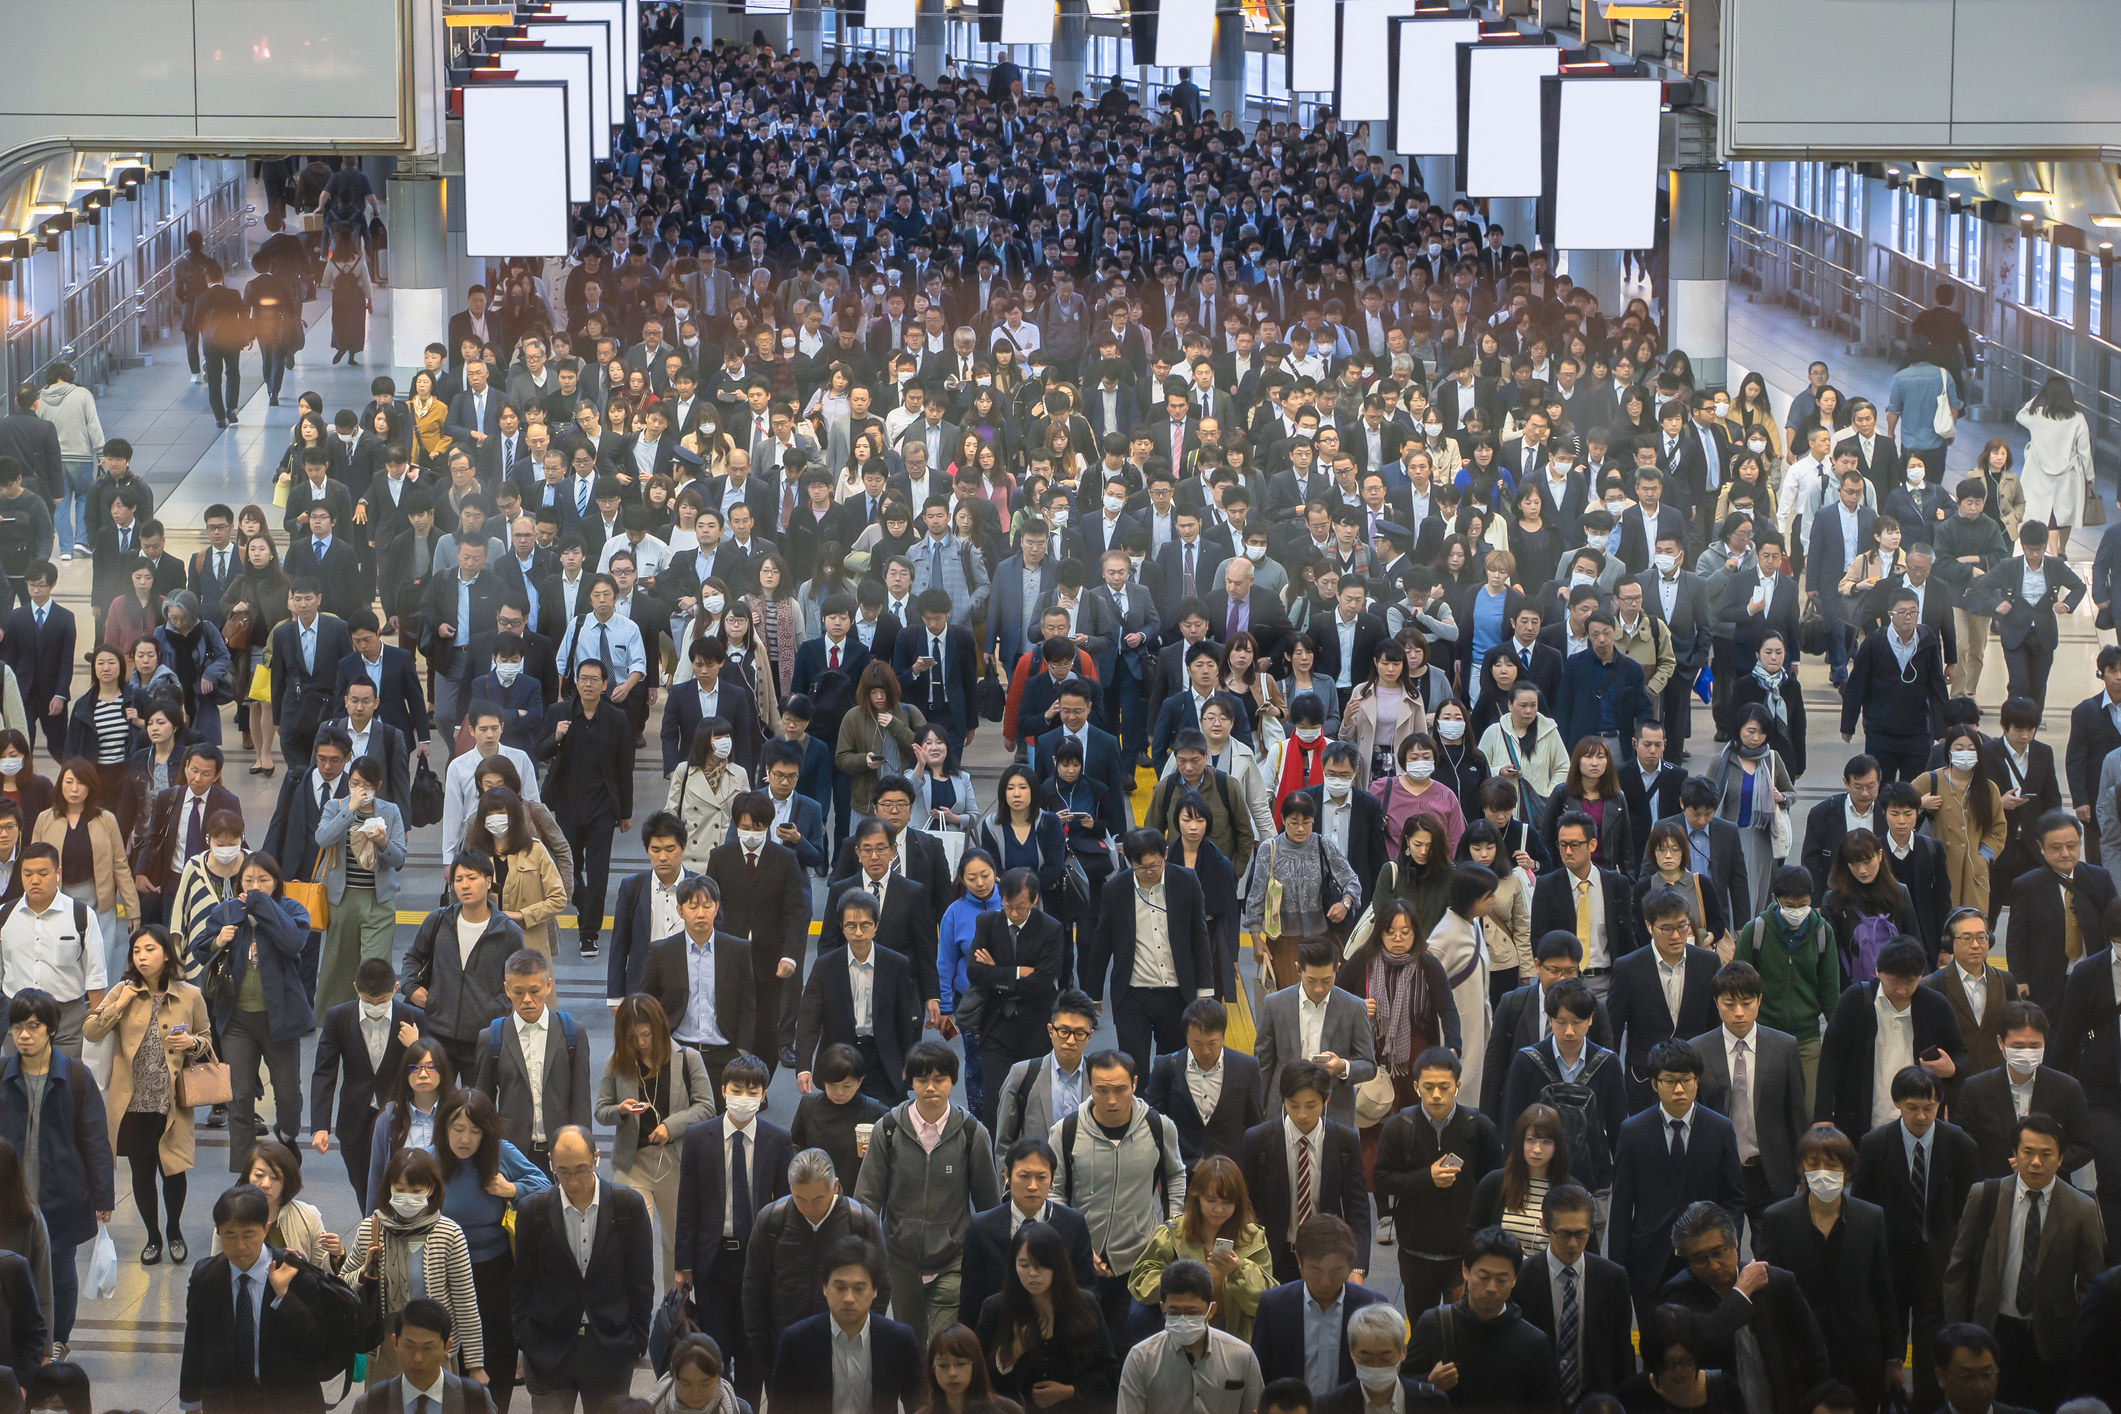 A huge crowd of people wearing suits